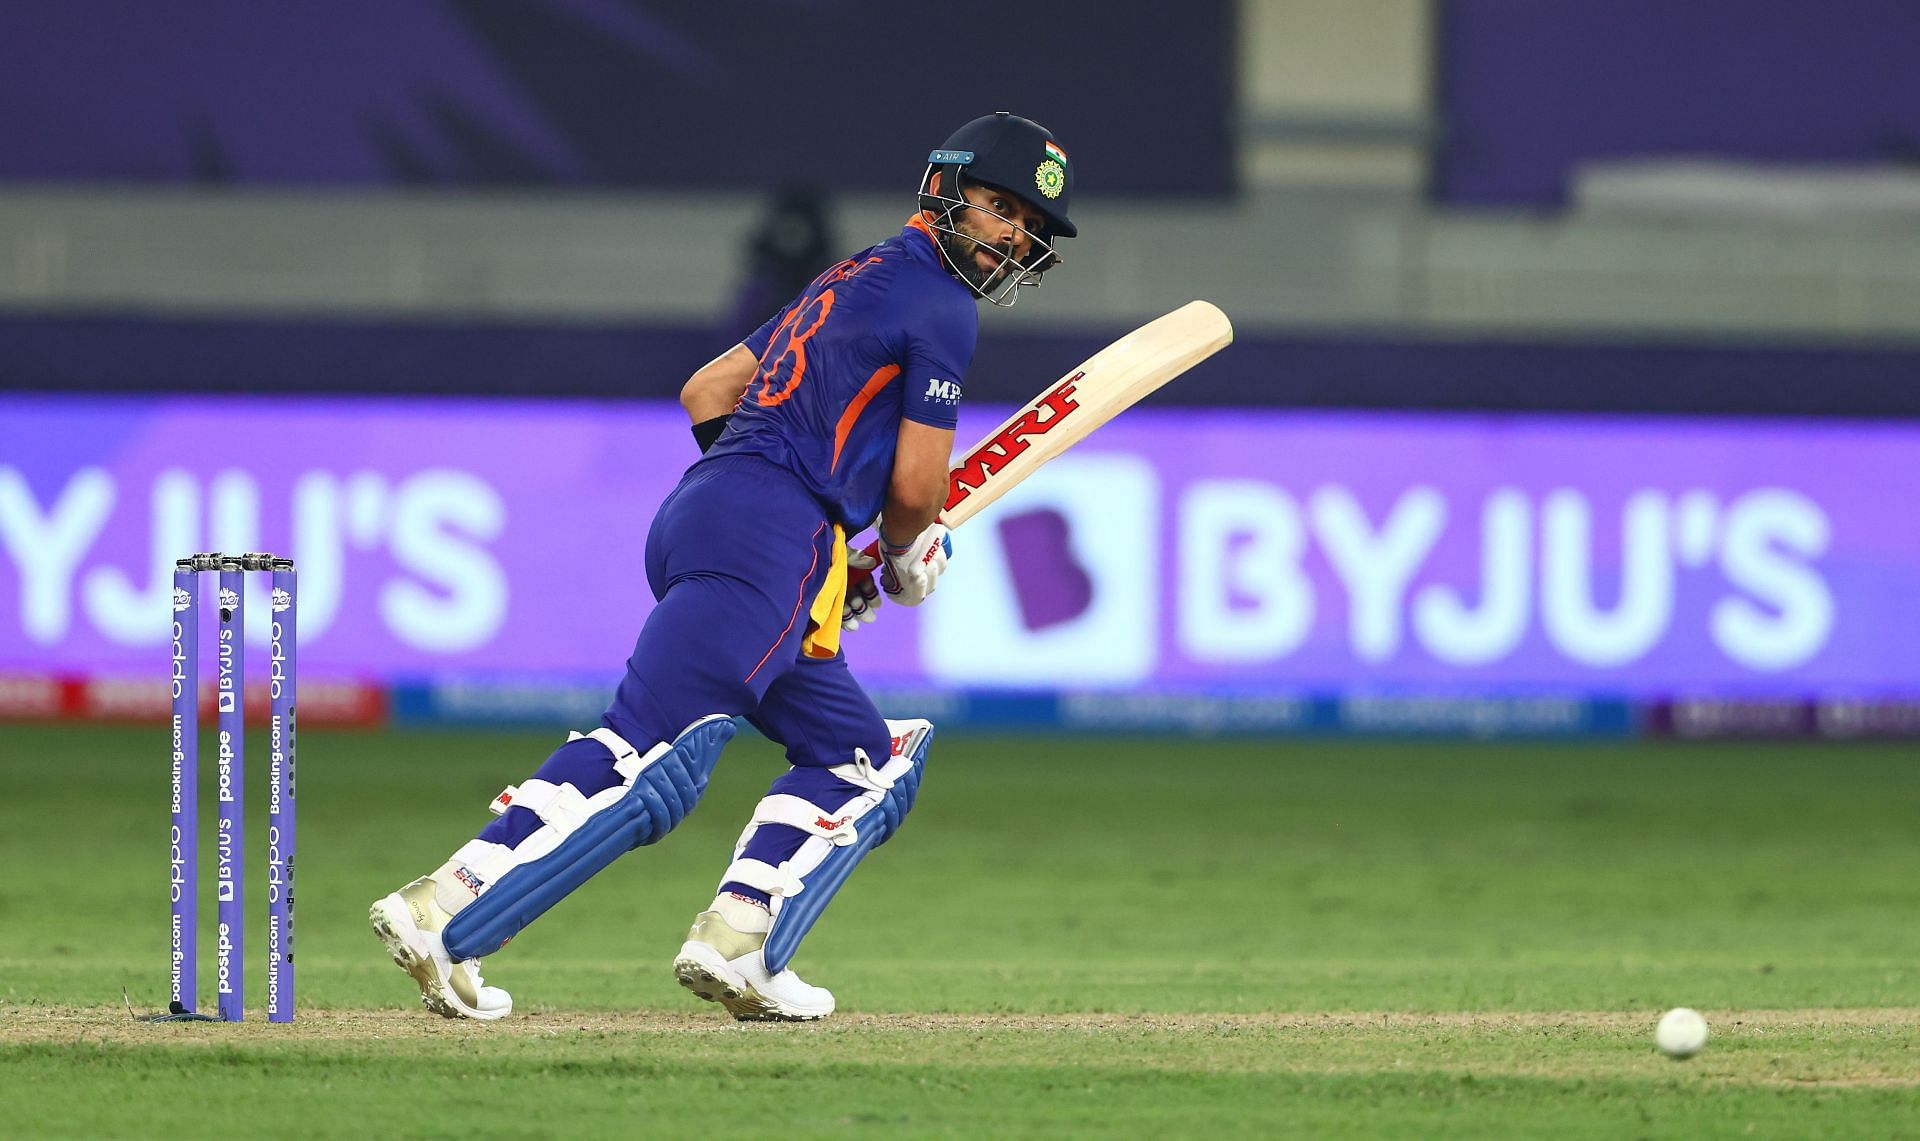 Kohli scored 57 off 49 balls after coming into bat in the very first over itself